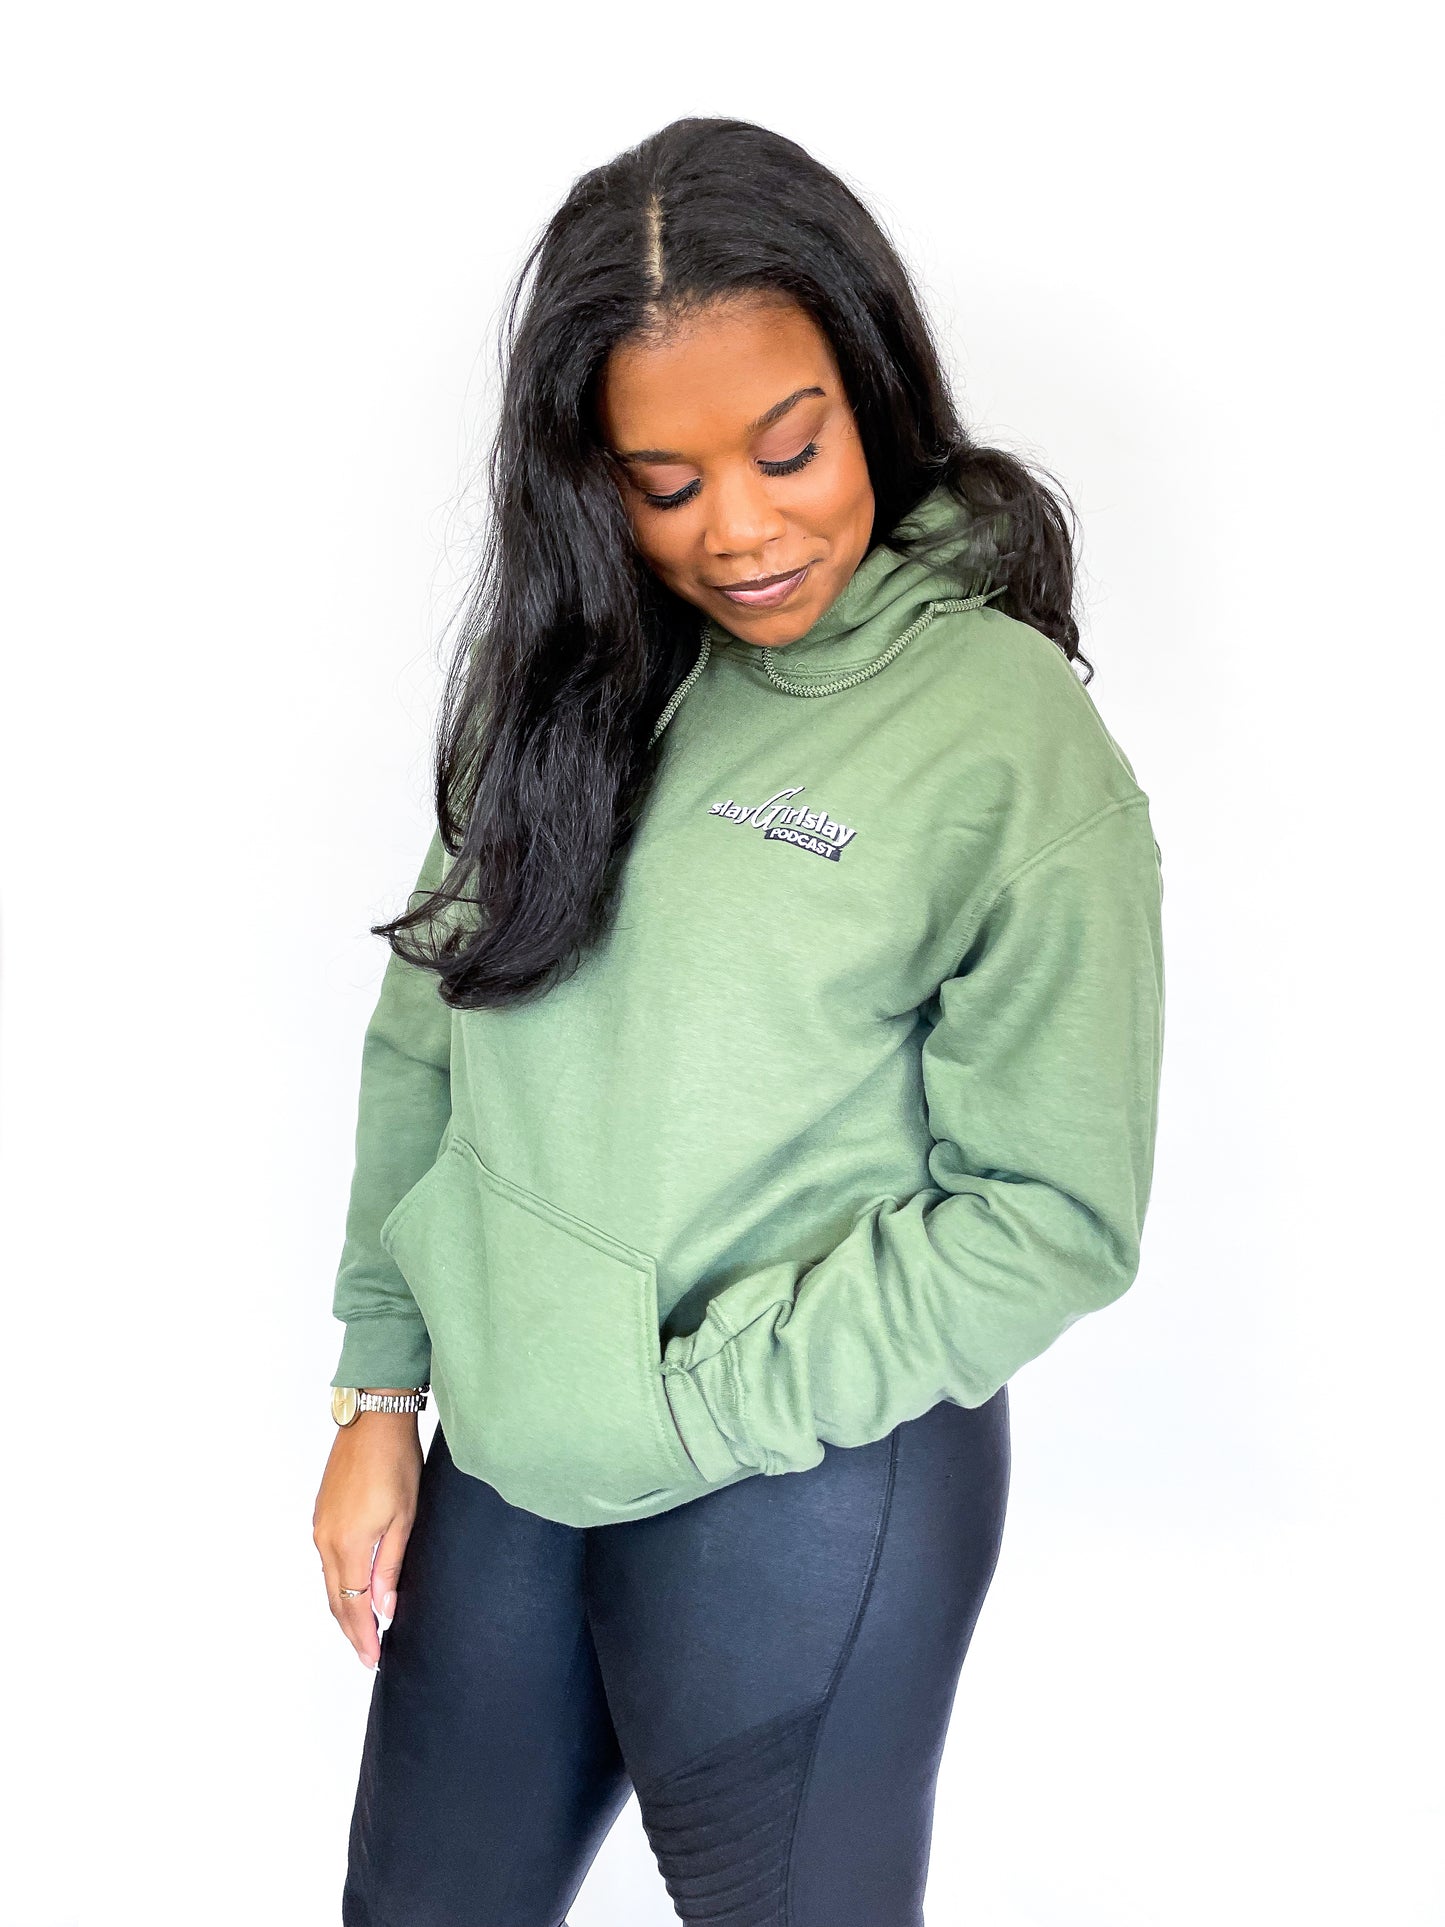 Official Slay Girl Slay Podcast Hoodie - Green